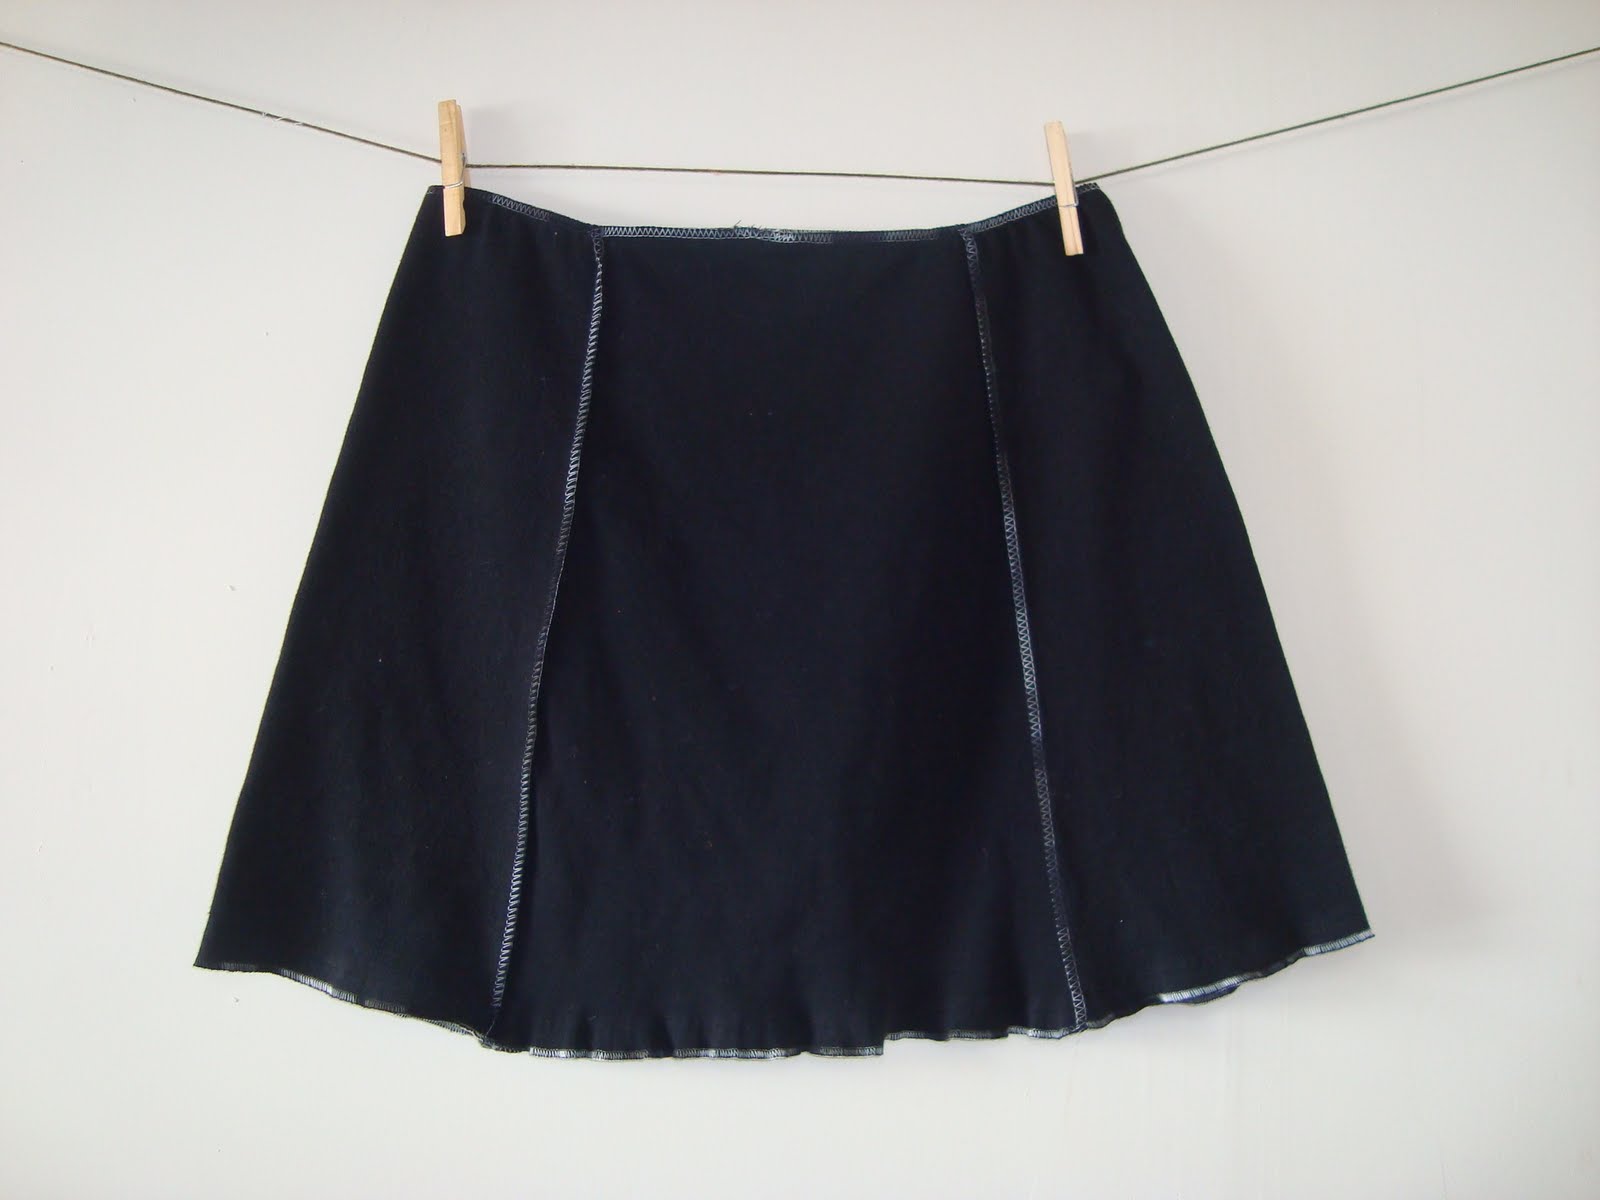 Madrone; regenerated clothing: Blank T-sKirt Samples